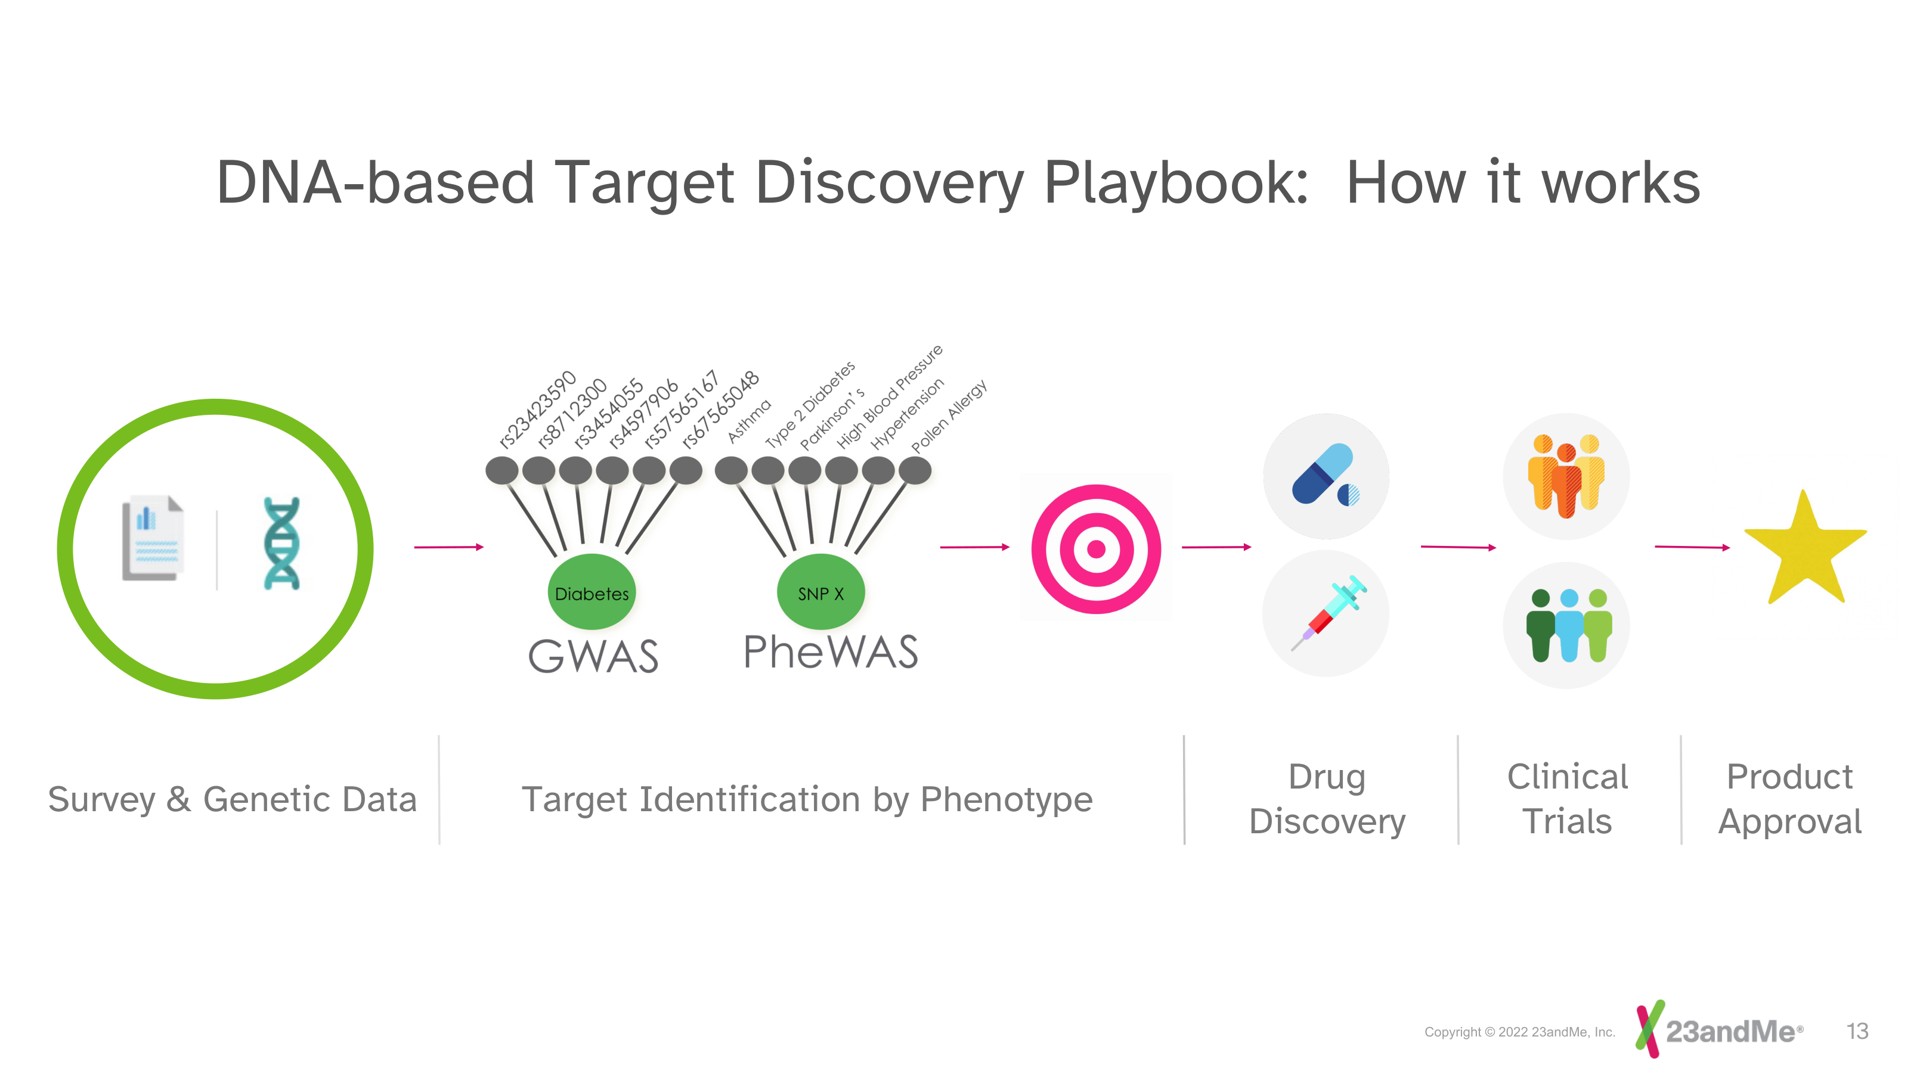 based target discovery playbook how it works or | 23andMe